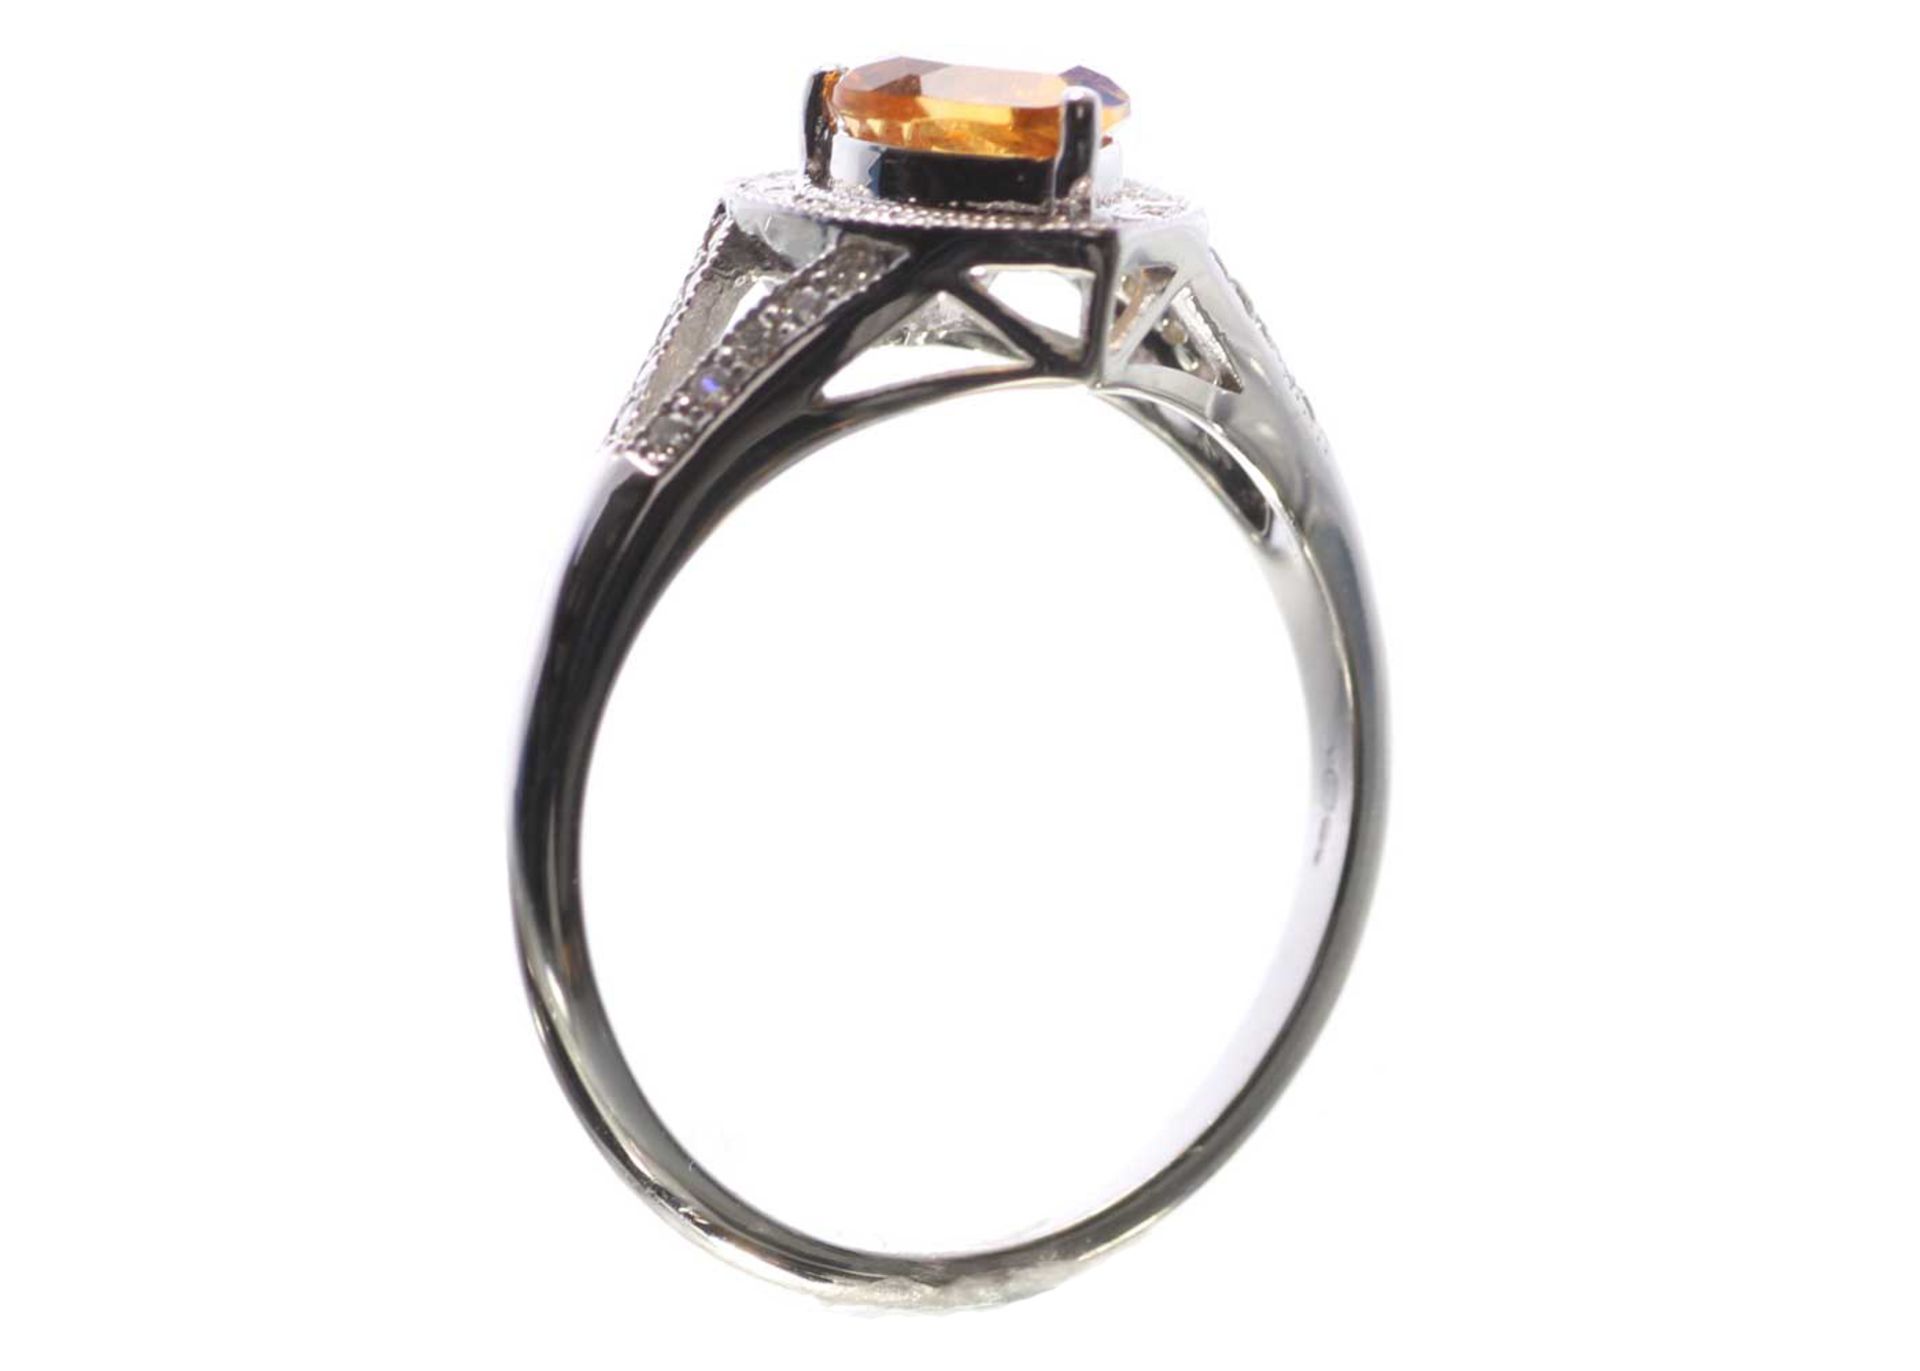 9ct White Gold Heart Shape Citrine Diamond Ring 0.20 Carats - Valued by GIE £2,445.00 - 9ct White - Image 3 of 5